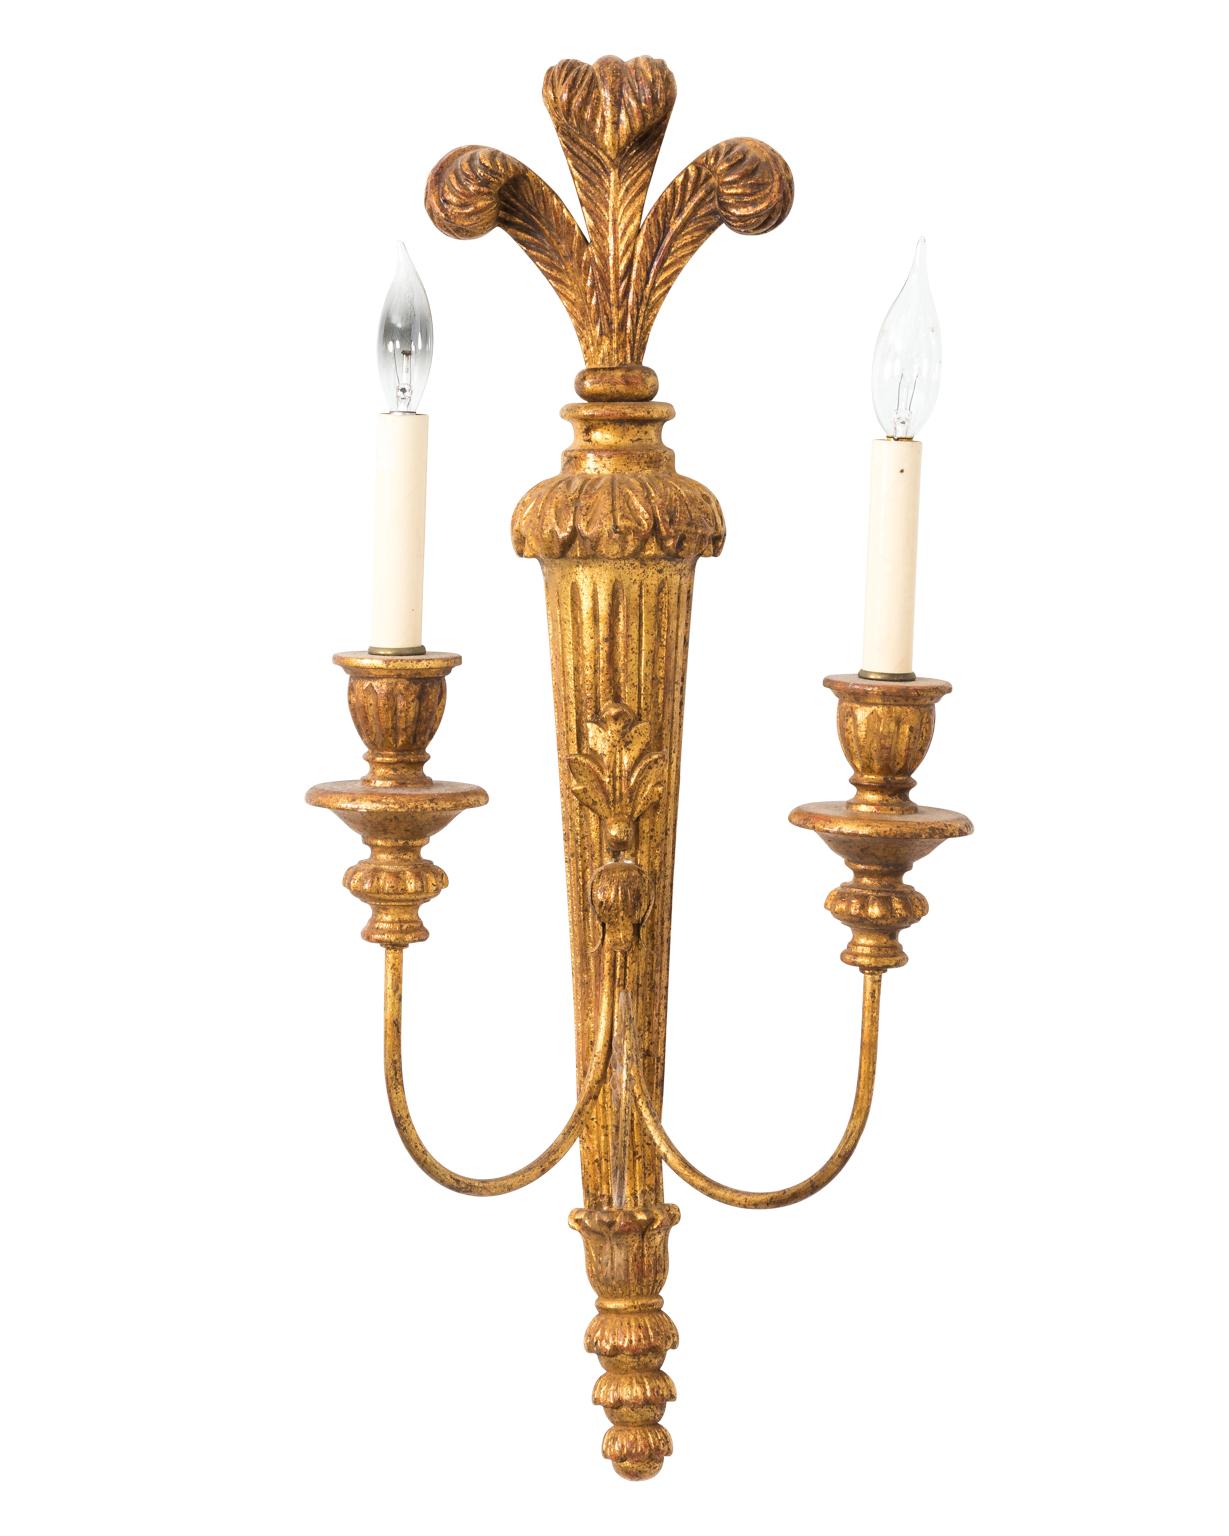 Pair of gilded neoclassical style two-light sconces, circa 1960s.